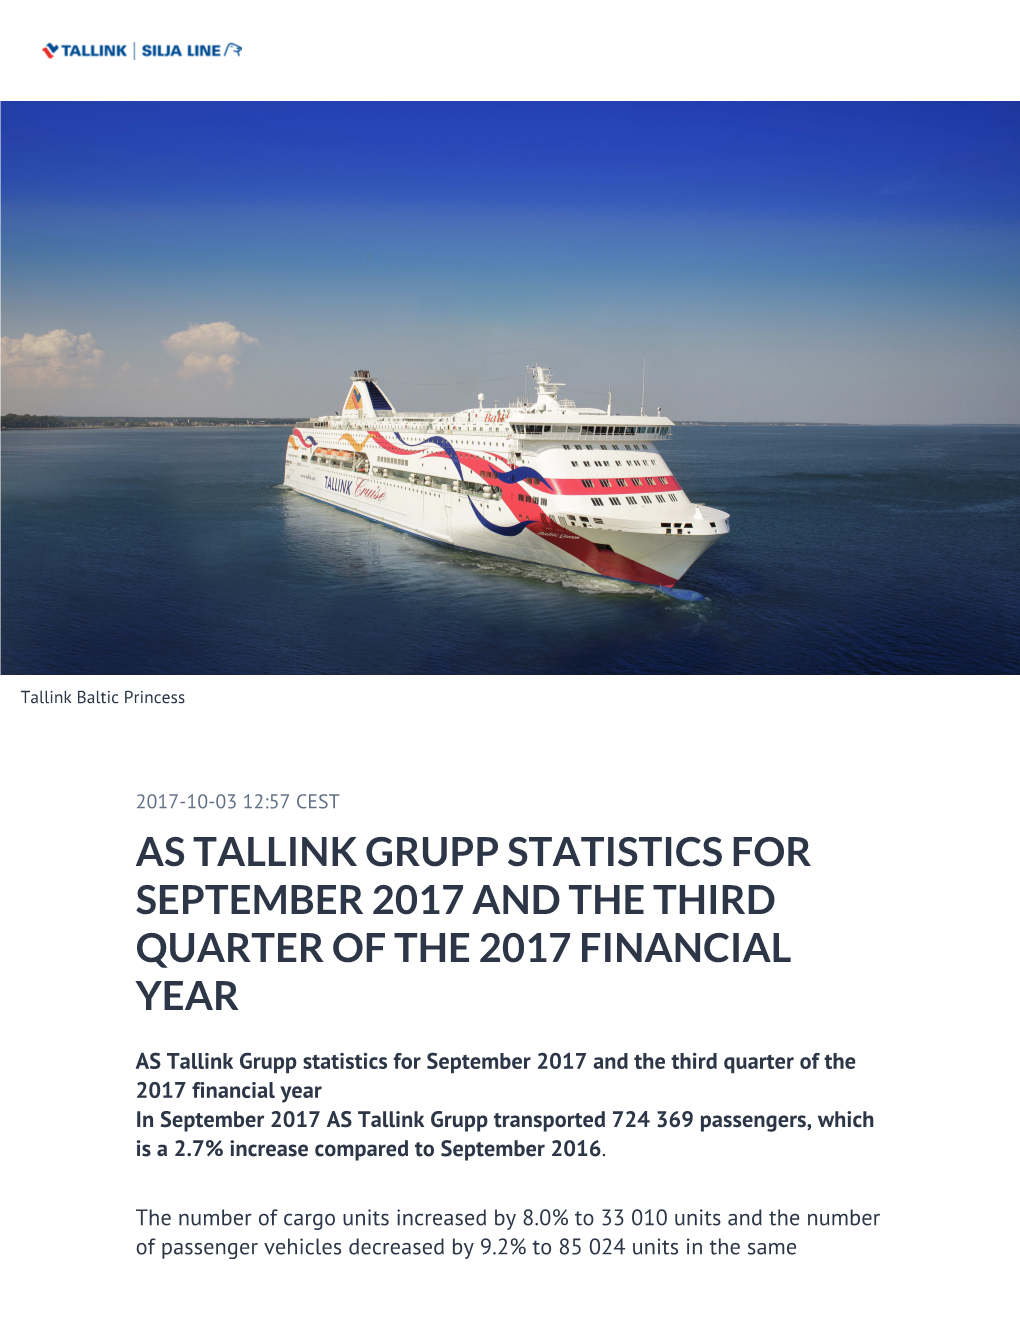 As Tallink Grupp Statistics for September 2017 and the Third Quarter of the 2017 Financial Year